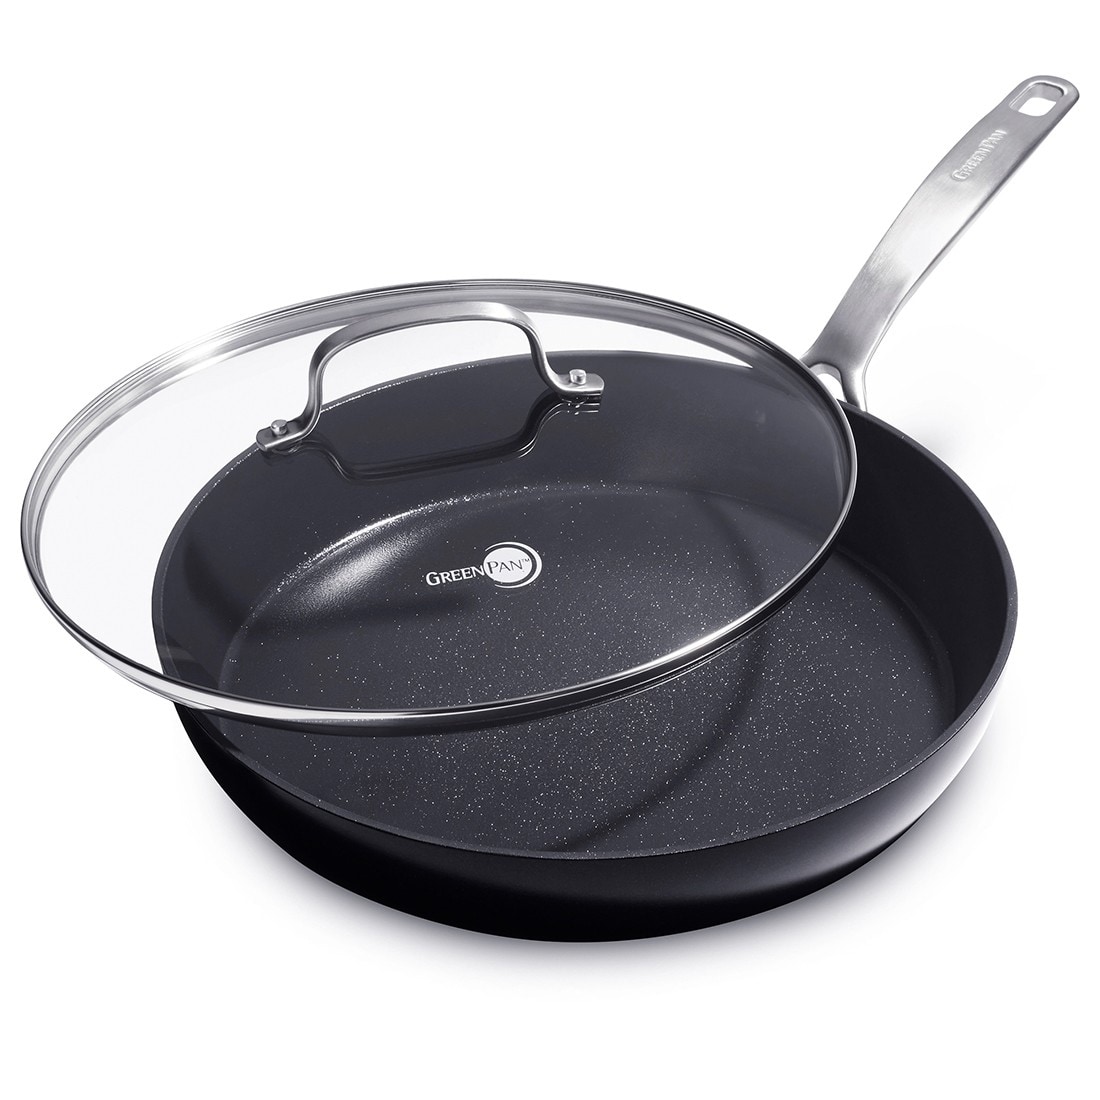 https://ak1.ostkcdn.com/images/products/is/images/direct/84934759f13e53fc38691c9051920eee72899d62/GreenPan-SearSmart-Hard-Anodized-Ceramic-Non-stick-Frying-Pan-with-Lid%2C-12%22.jpg